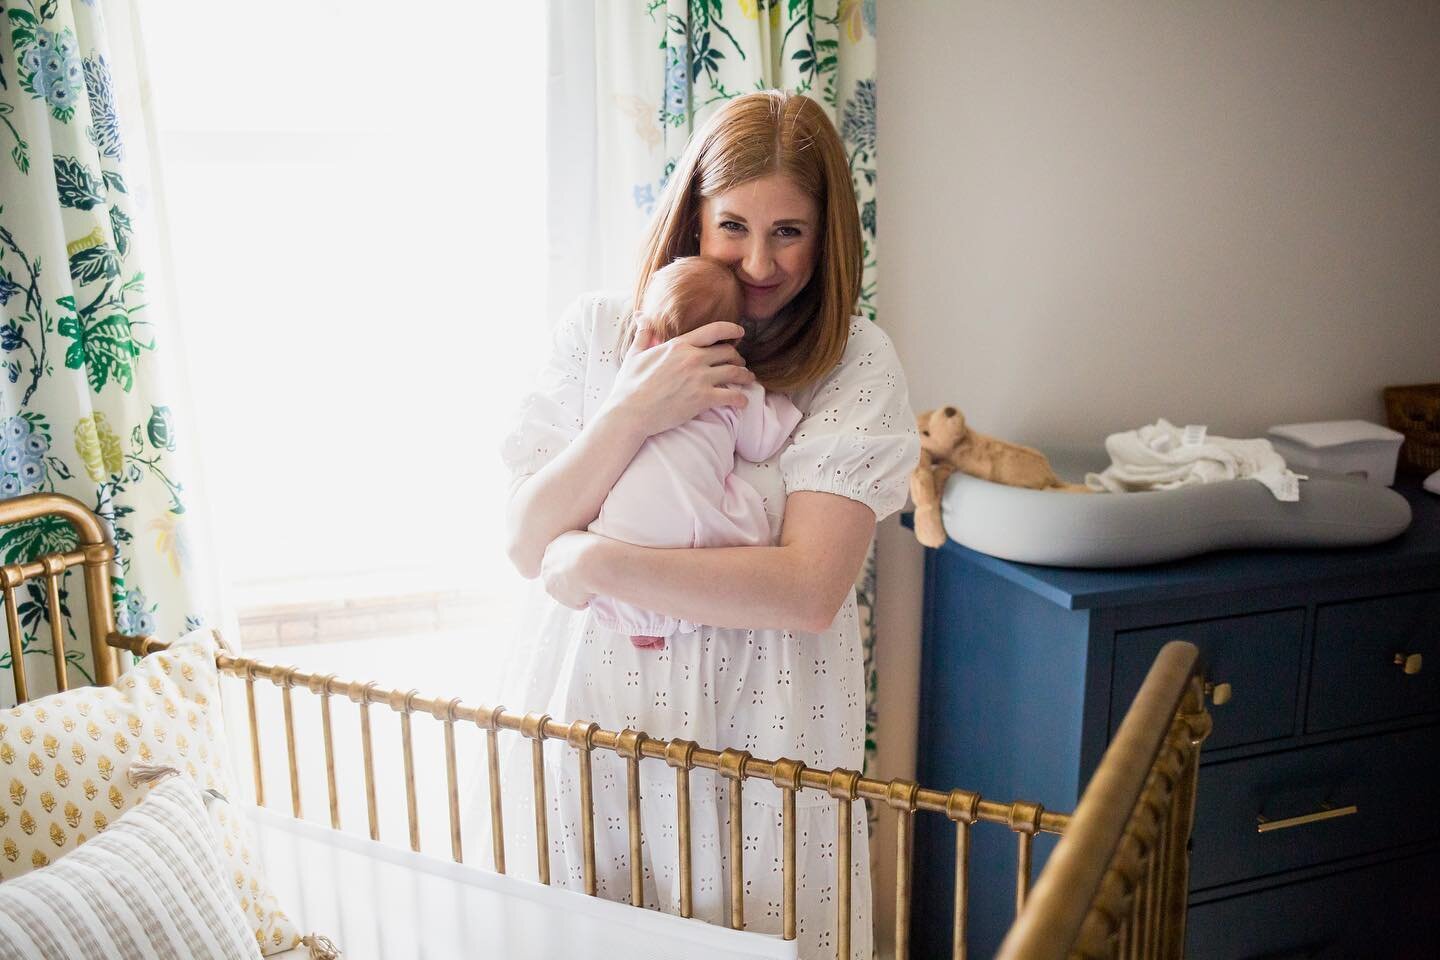 This redheaded mama got a redheaded baby girl and it is just the cutest. 😍 
.
.
.
.
#denvernewbornphotographer #denvernewborns #denvernewbornphoto #canon #canon5dmarkiii #southdenverphotographer #denverlifestylephotographer